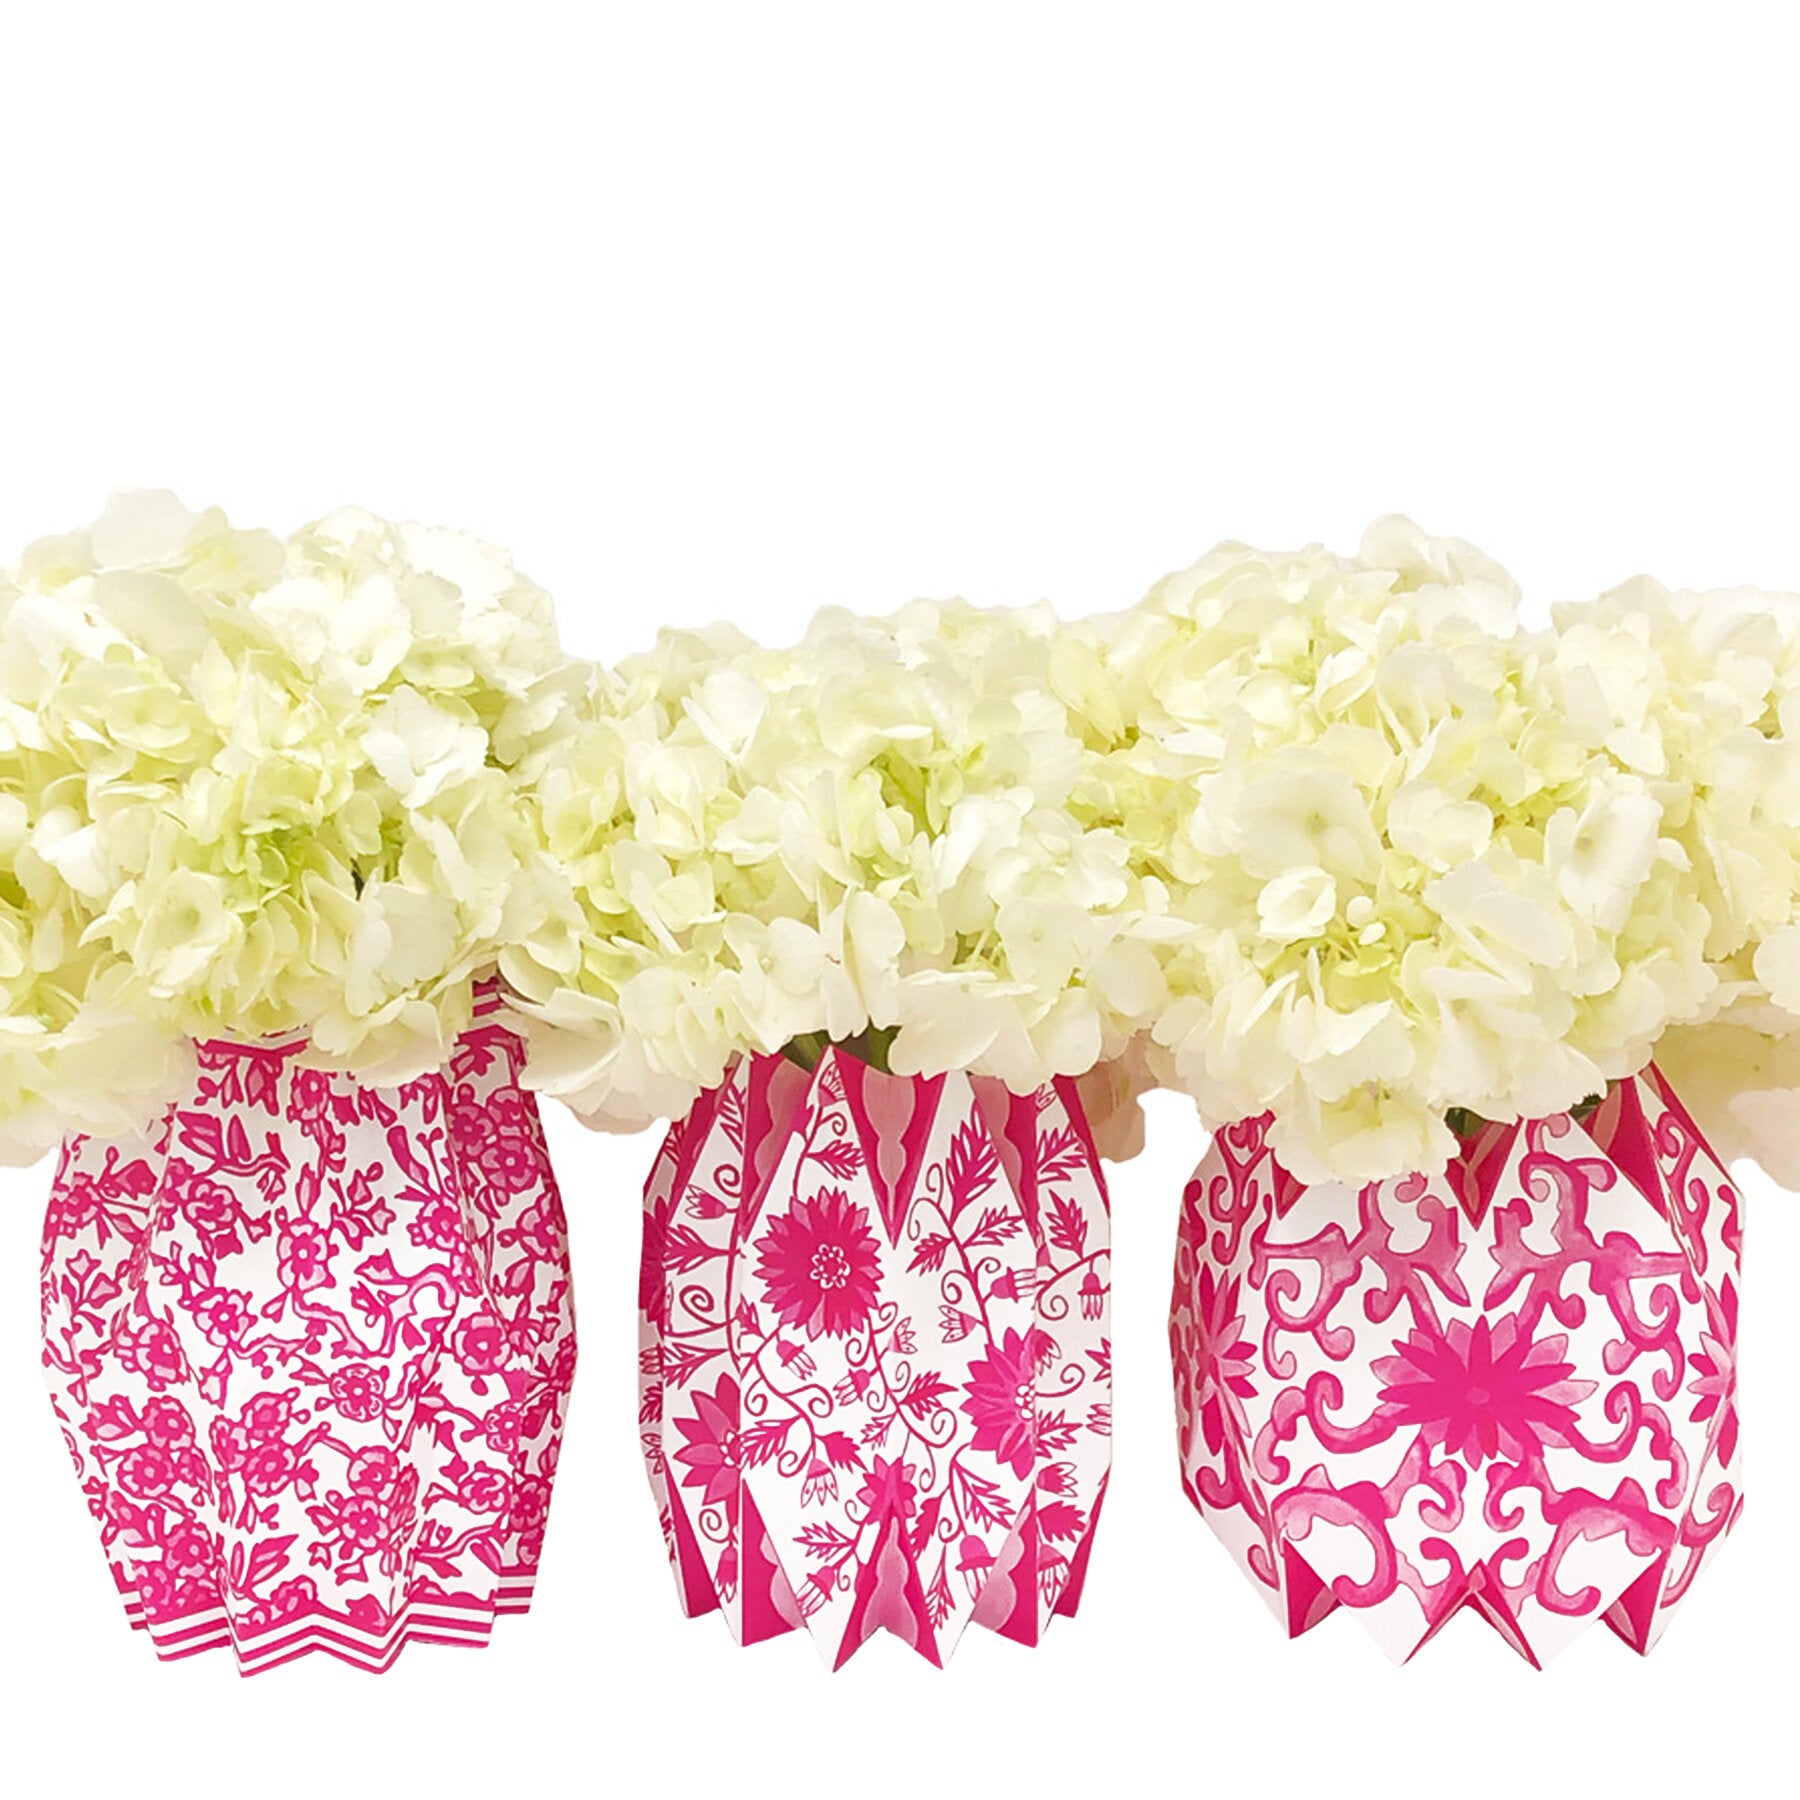 Pink and white chinoiserie paper vases with white flowers